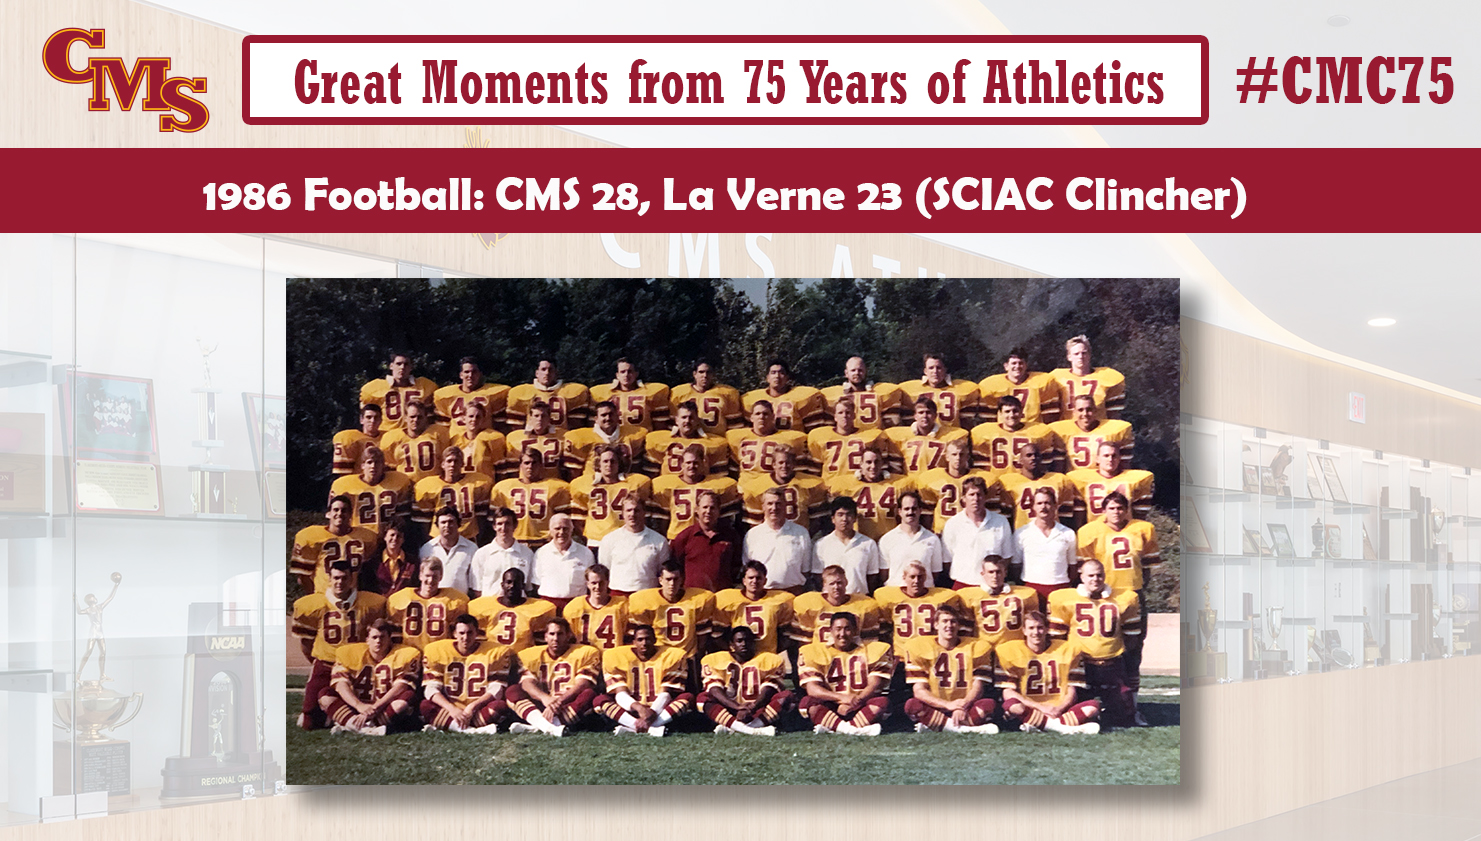 A team photo of the 1986 CMS Football team. Words read: Great Moments from 75 Years of Athletics, 1986 Football: CMS 28, La Verne 23 (SCIAC Clincher)